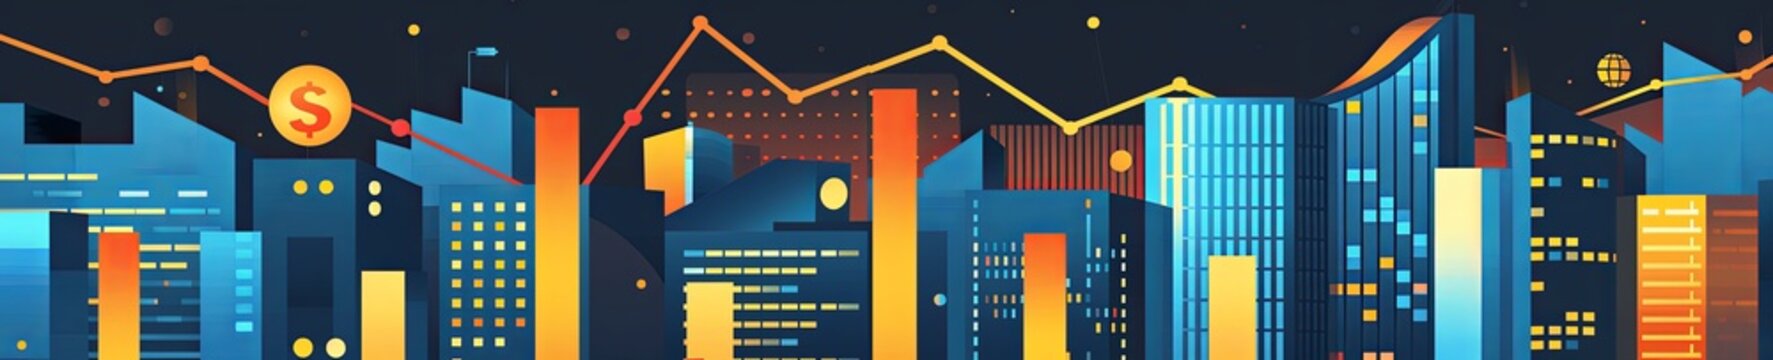 Night cityscape with glowing financial graphs and dollar symbol. Vector illustration for economic trends, stock market and financial planning.